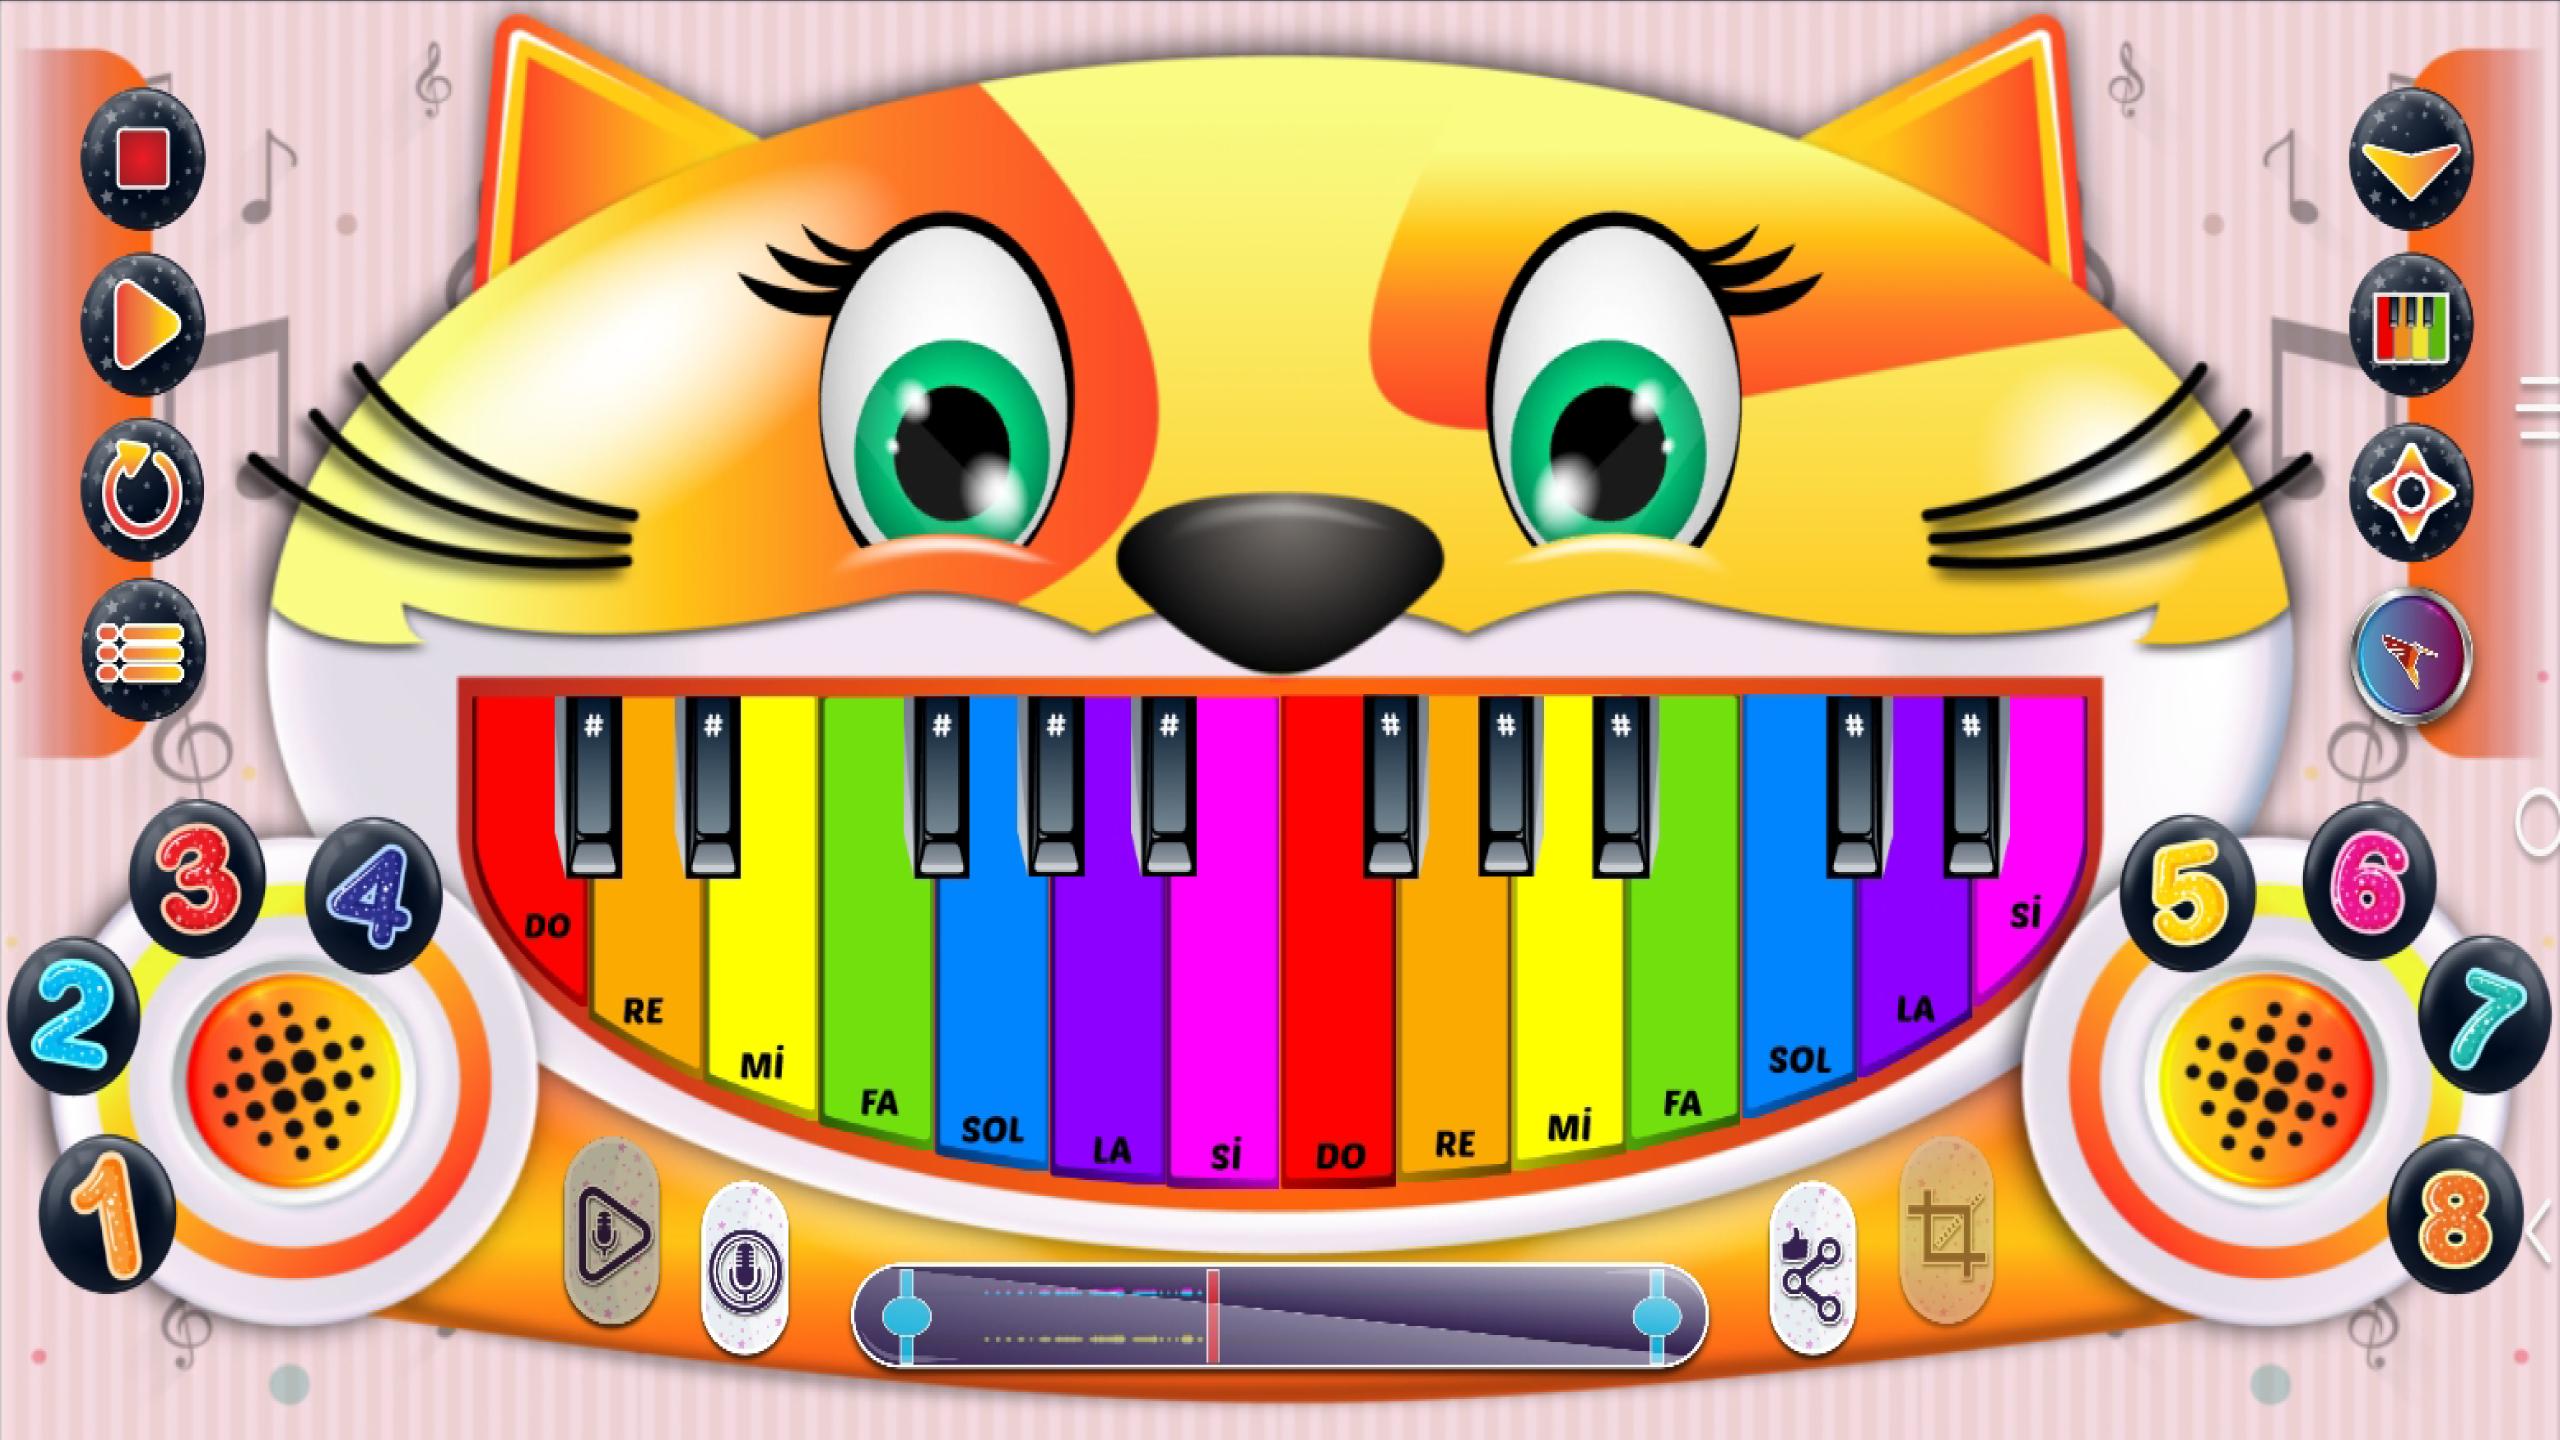 Meow Music for Android - APK Download